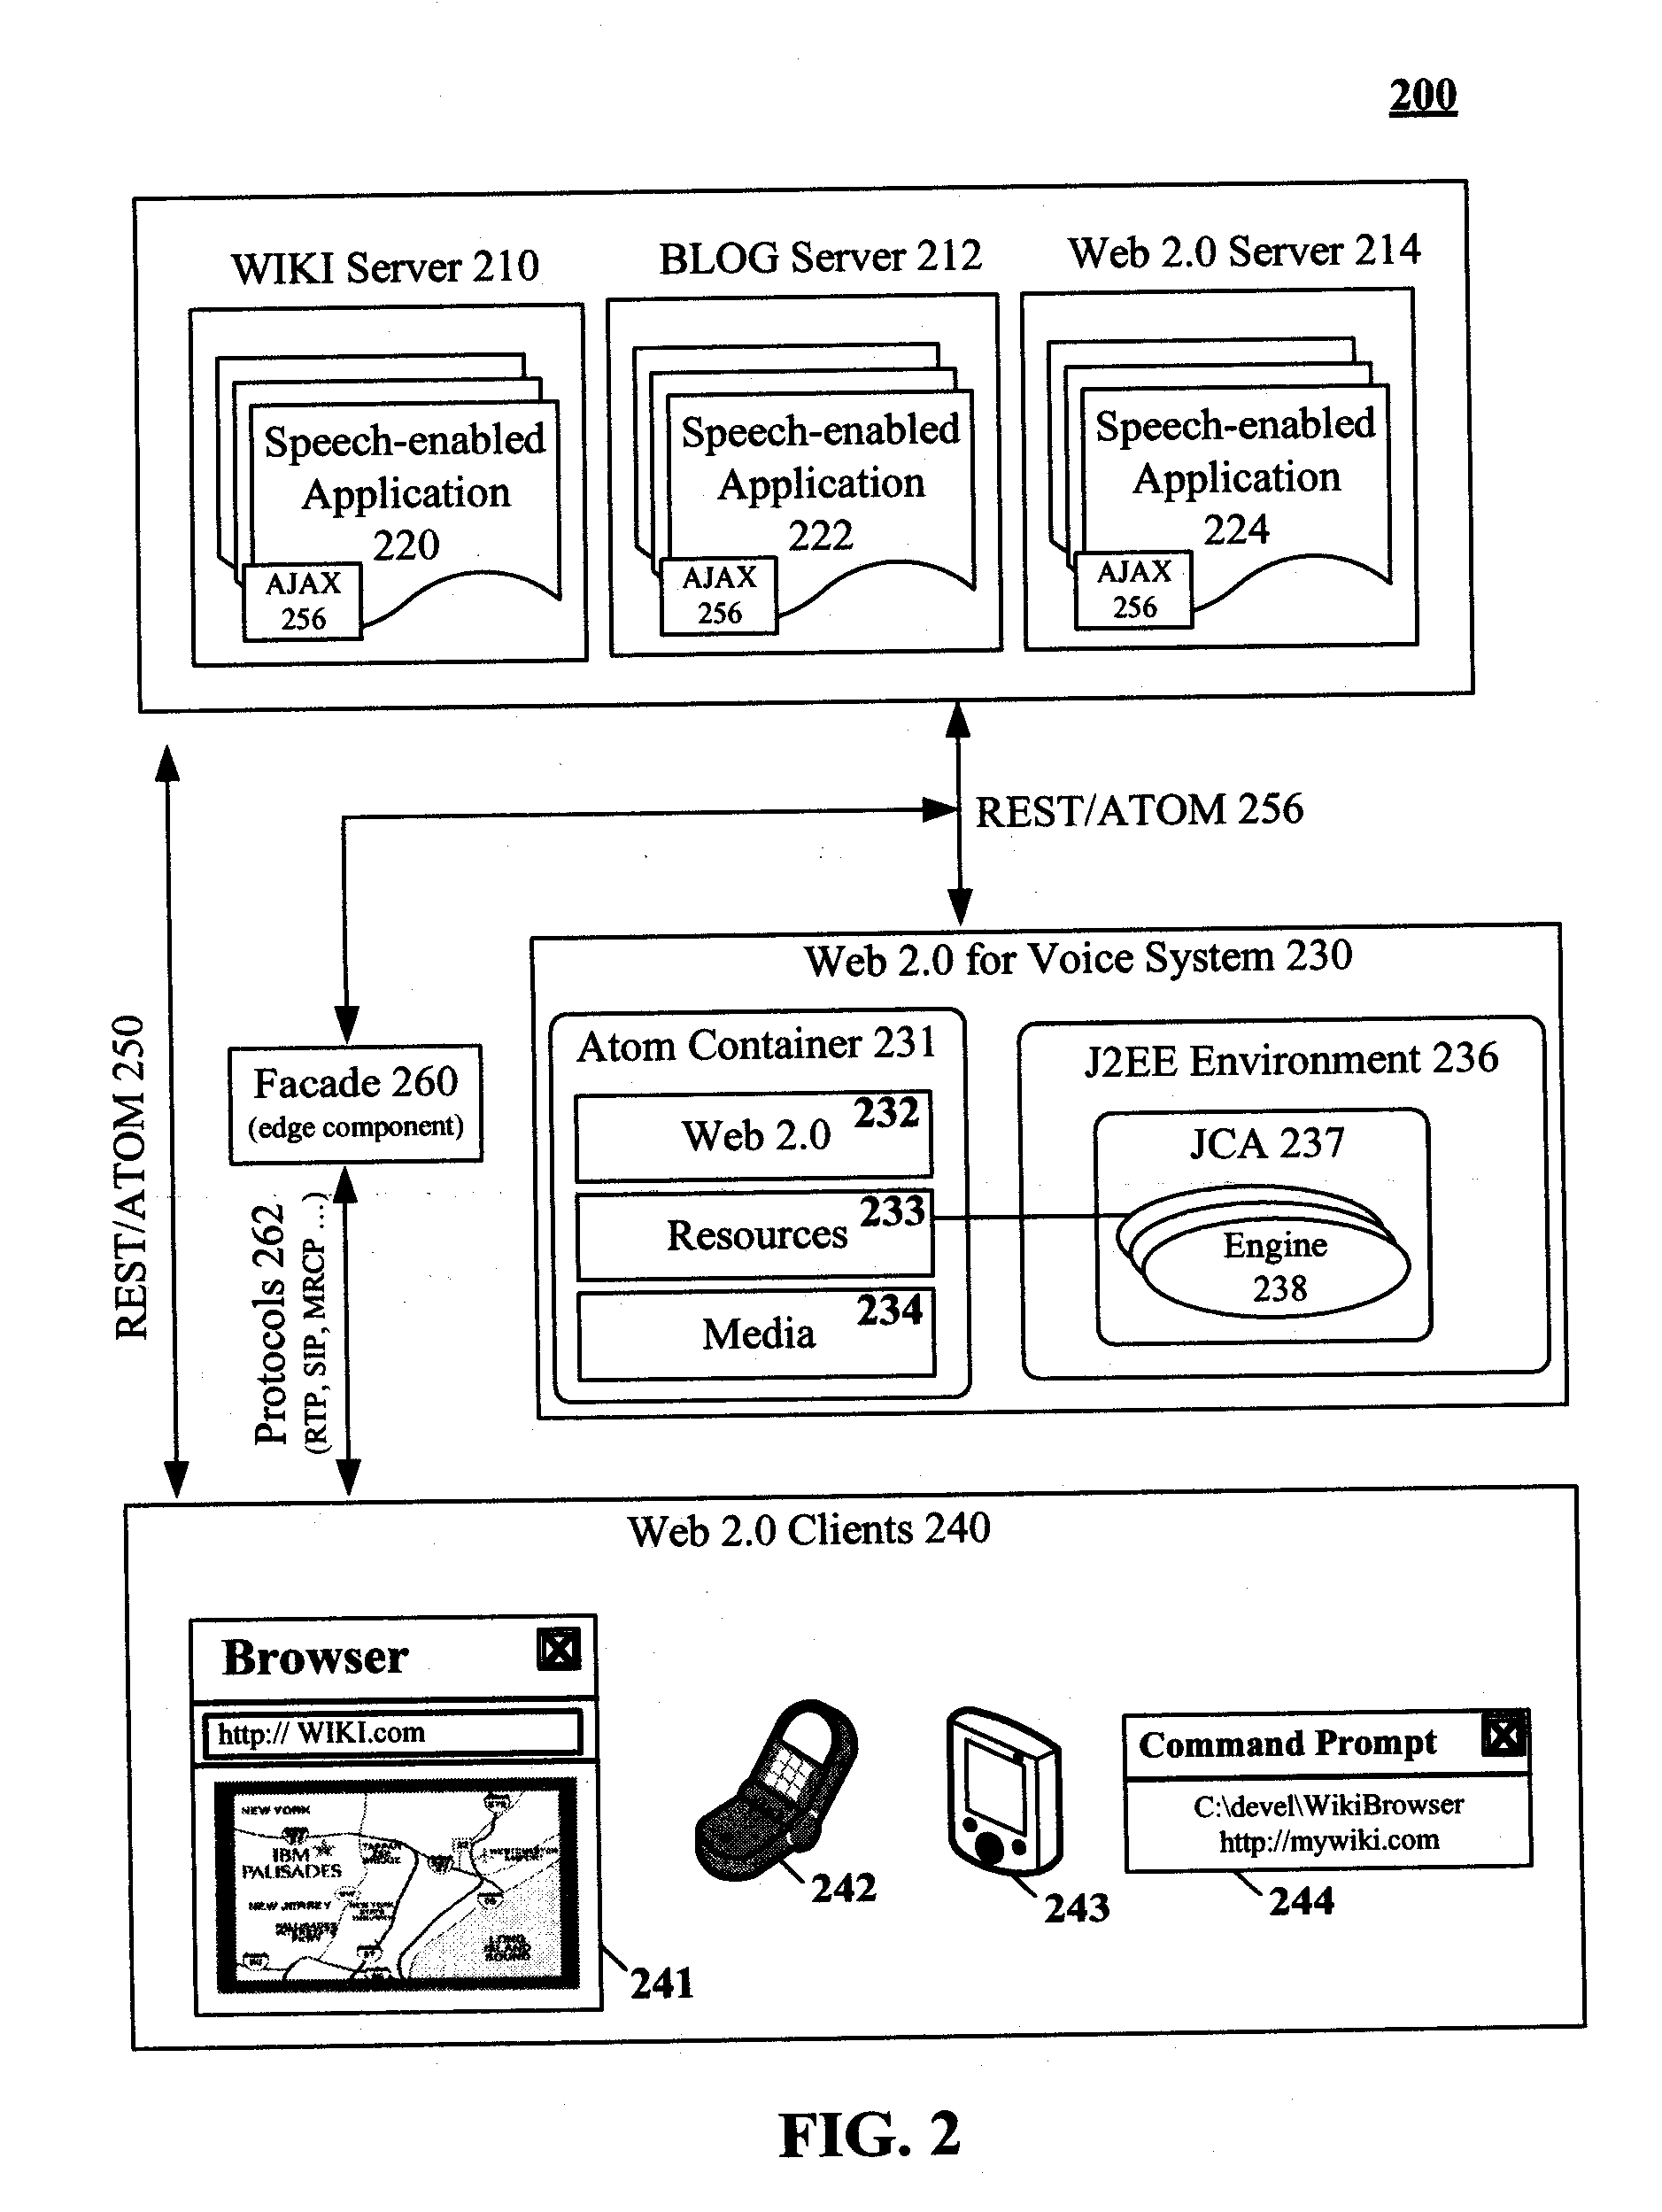 Speech processing system based upon a representational state transfer (REST) architecture that uses web 2.0 concepts for speech resource interfaces